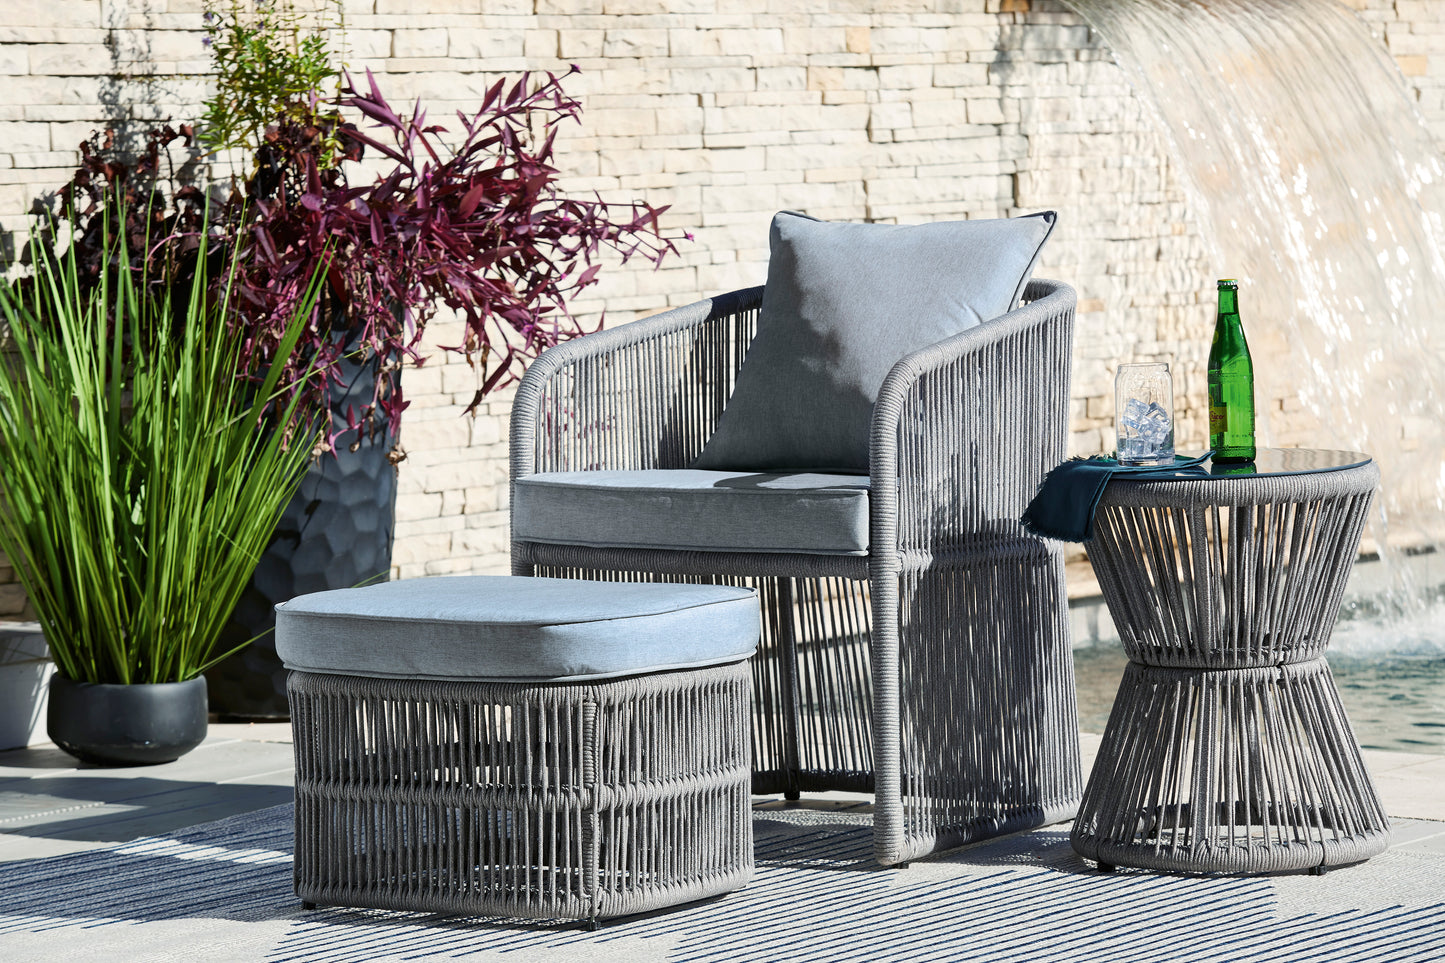 Coast Island outdoor chair, ottoman and side table set